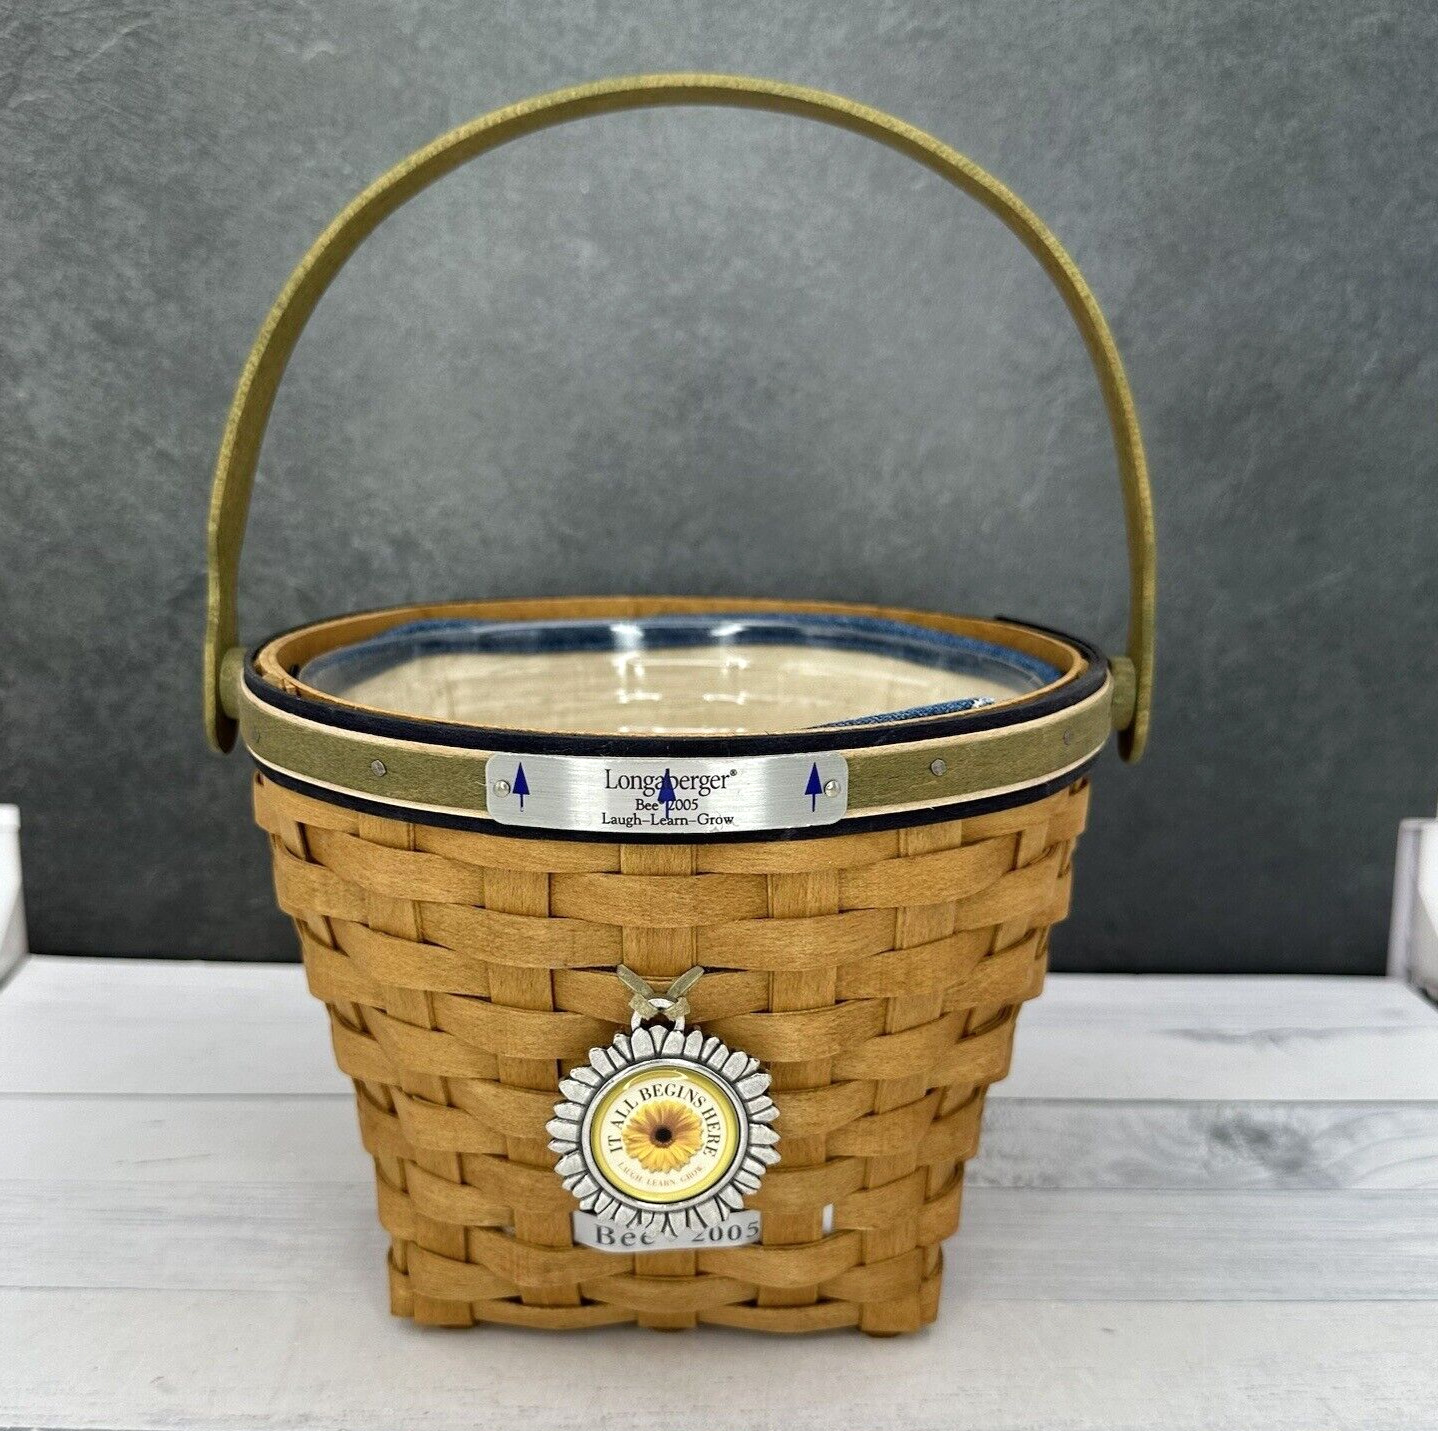 2005 Longaberger Laugh Learn Grow Bee Basket with Liner and Protector